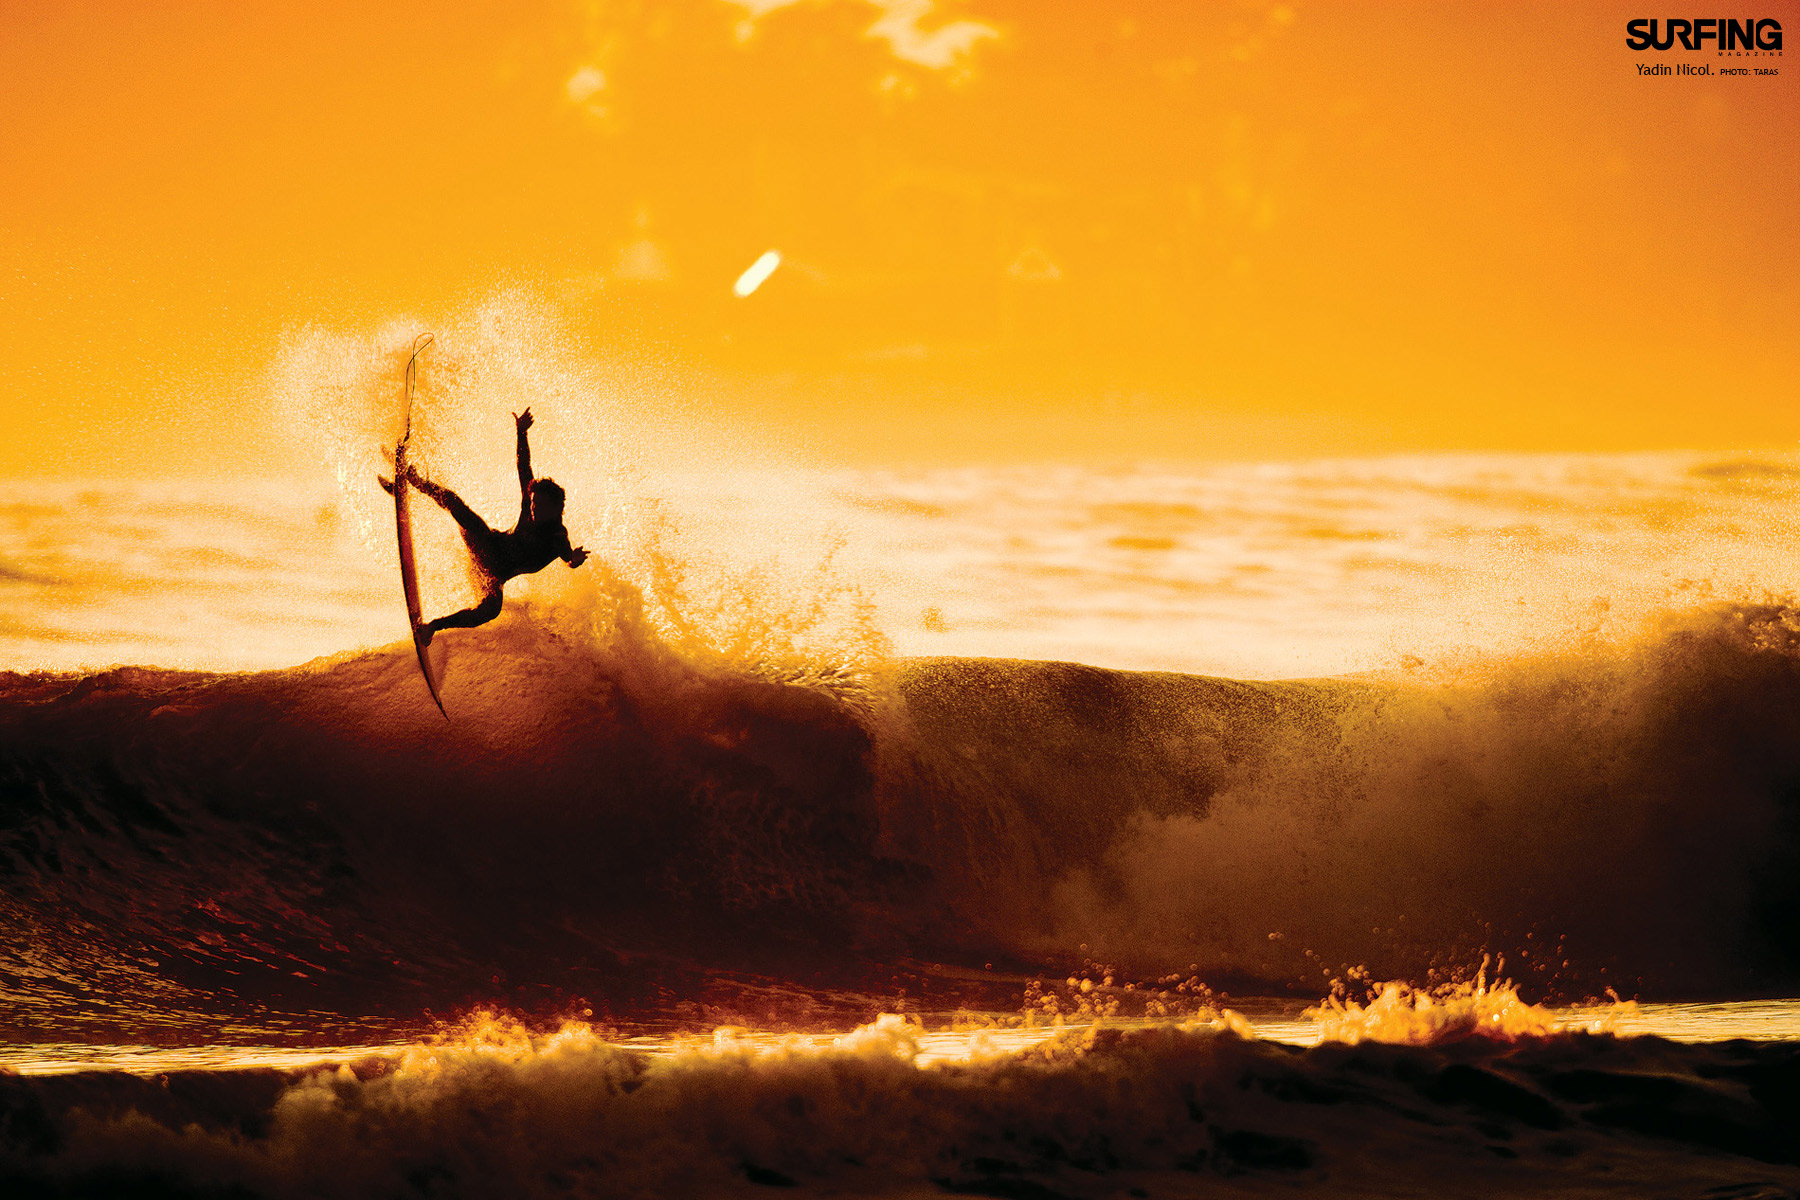 Surfing Image Golden Waves HD Wallpaper And Background Photos